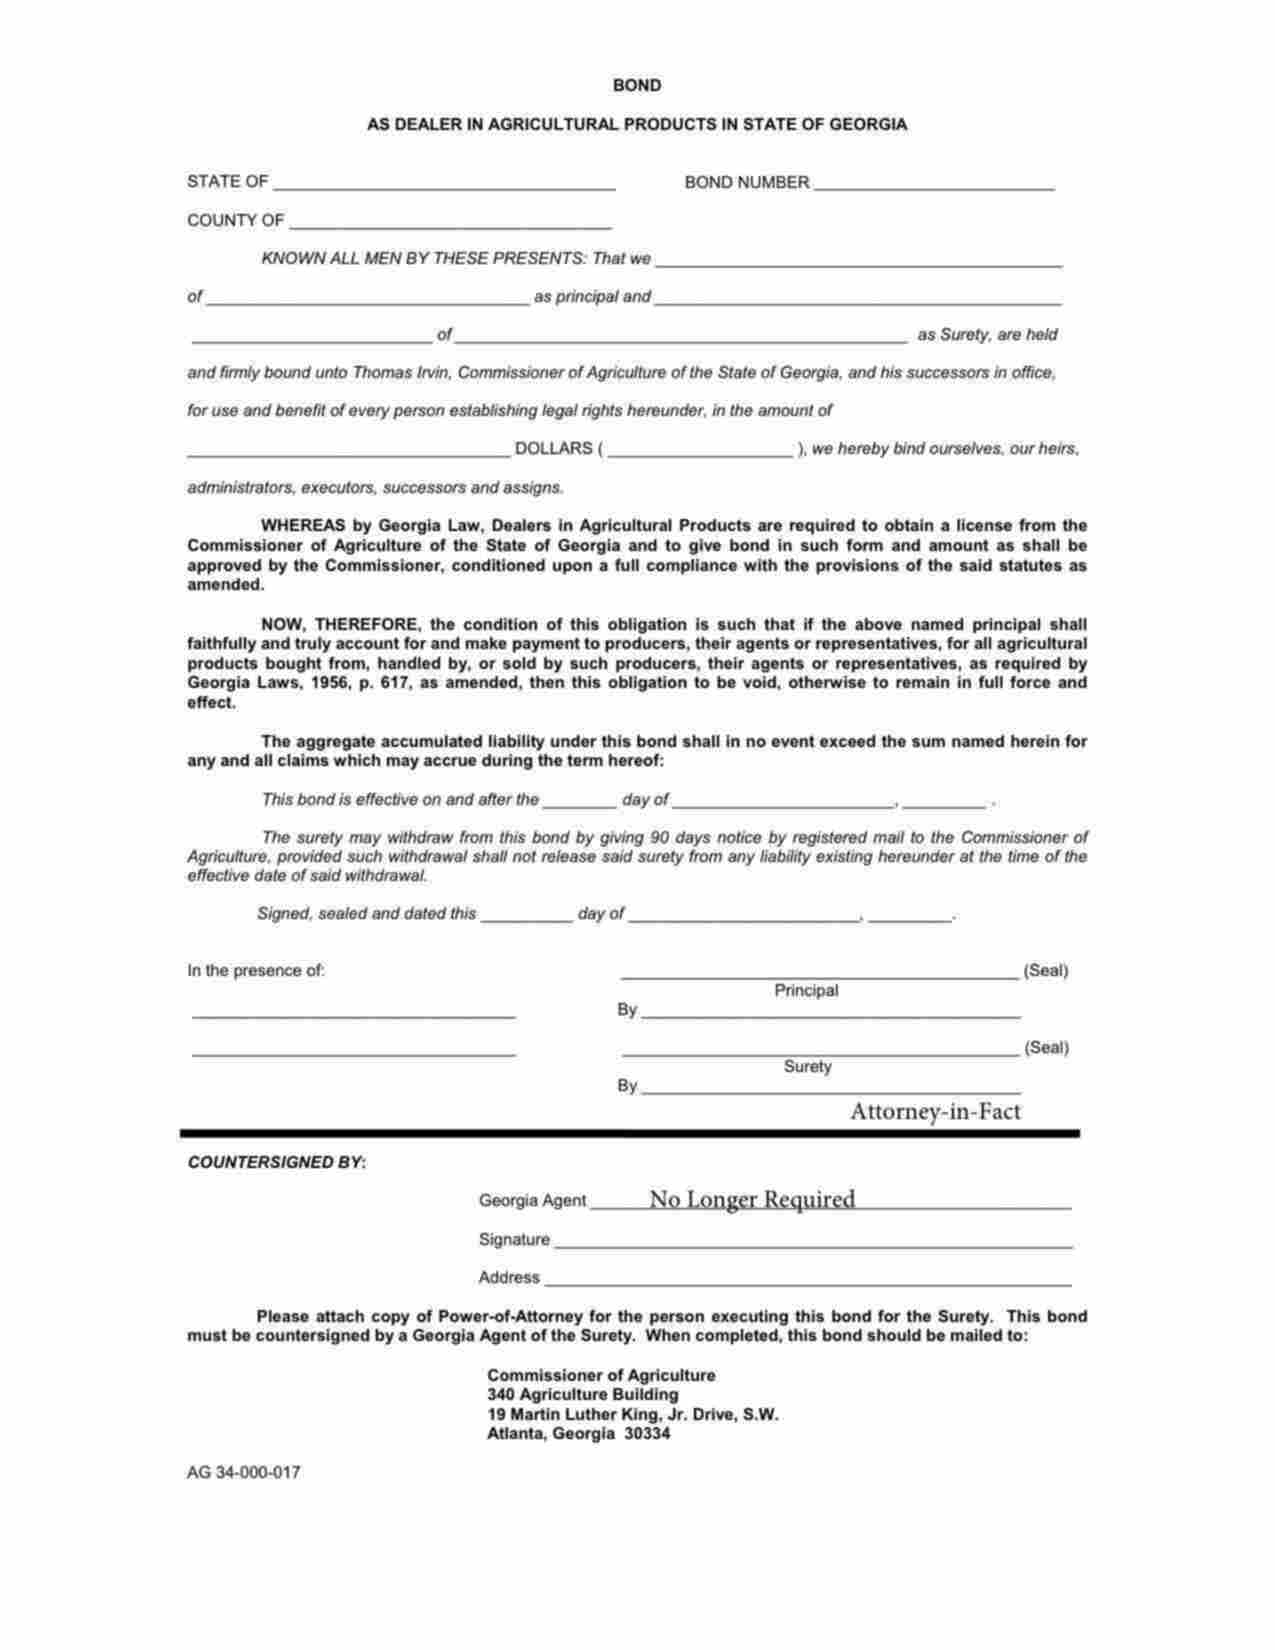 Georgia Dealer in Agricultural Products Bond Form